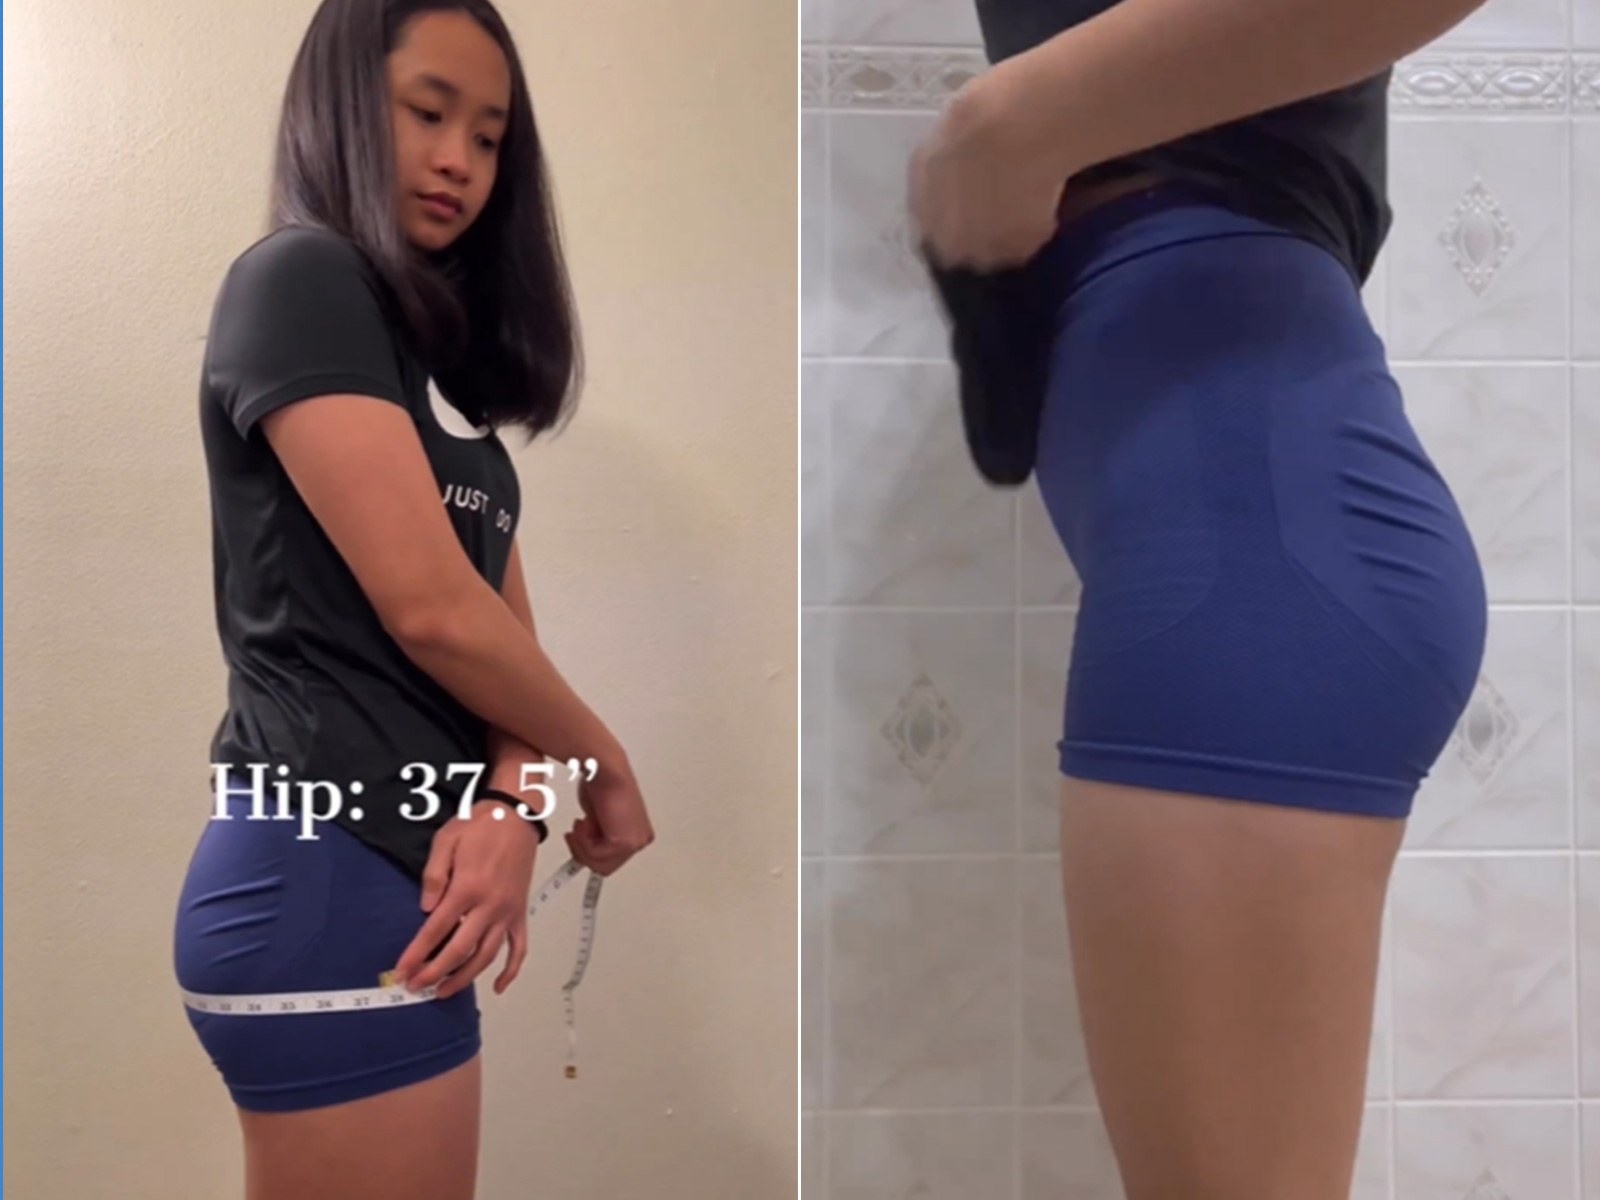 Woman Shocked by Results From 100 Squats a Day Challenge: 'So Much Change